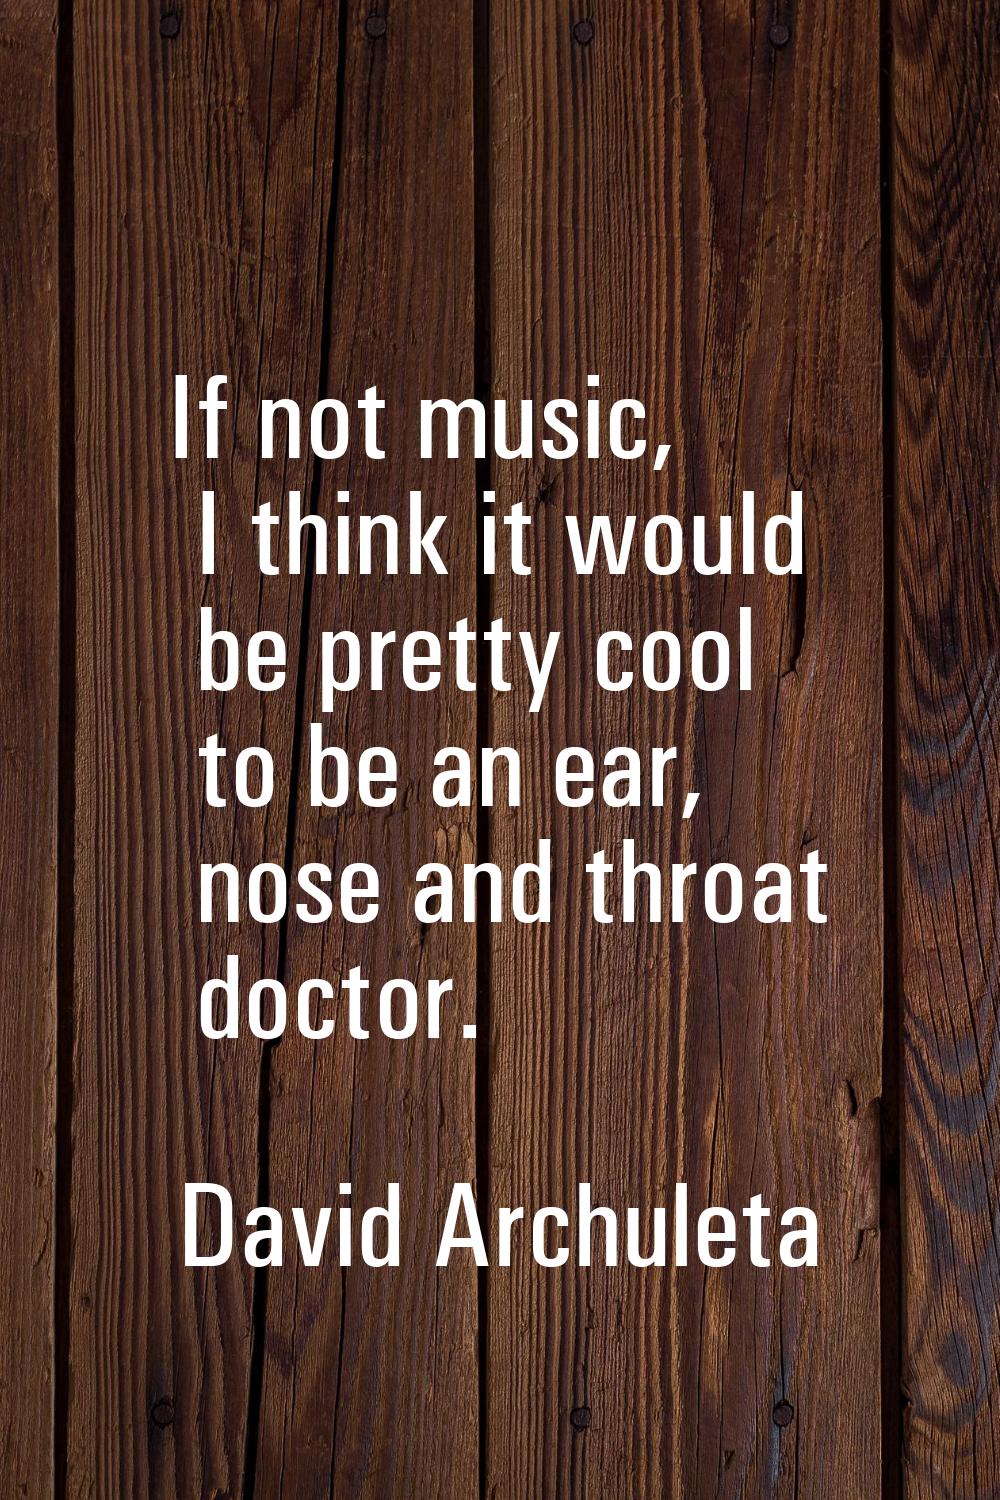 If not music, I think it would be pretty cool to be an ear, nose and throat doctor.